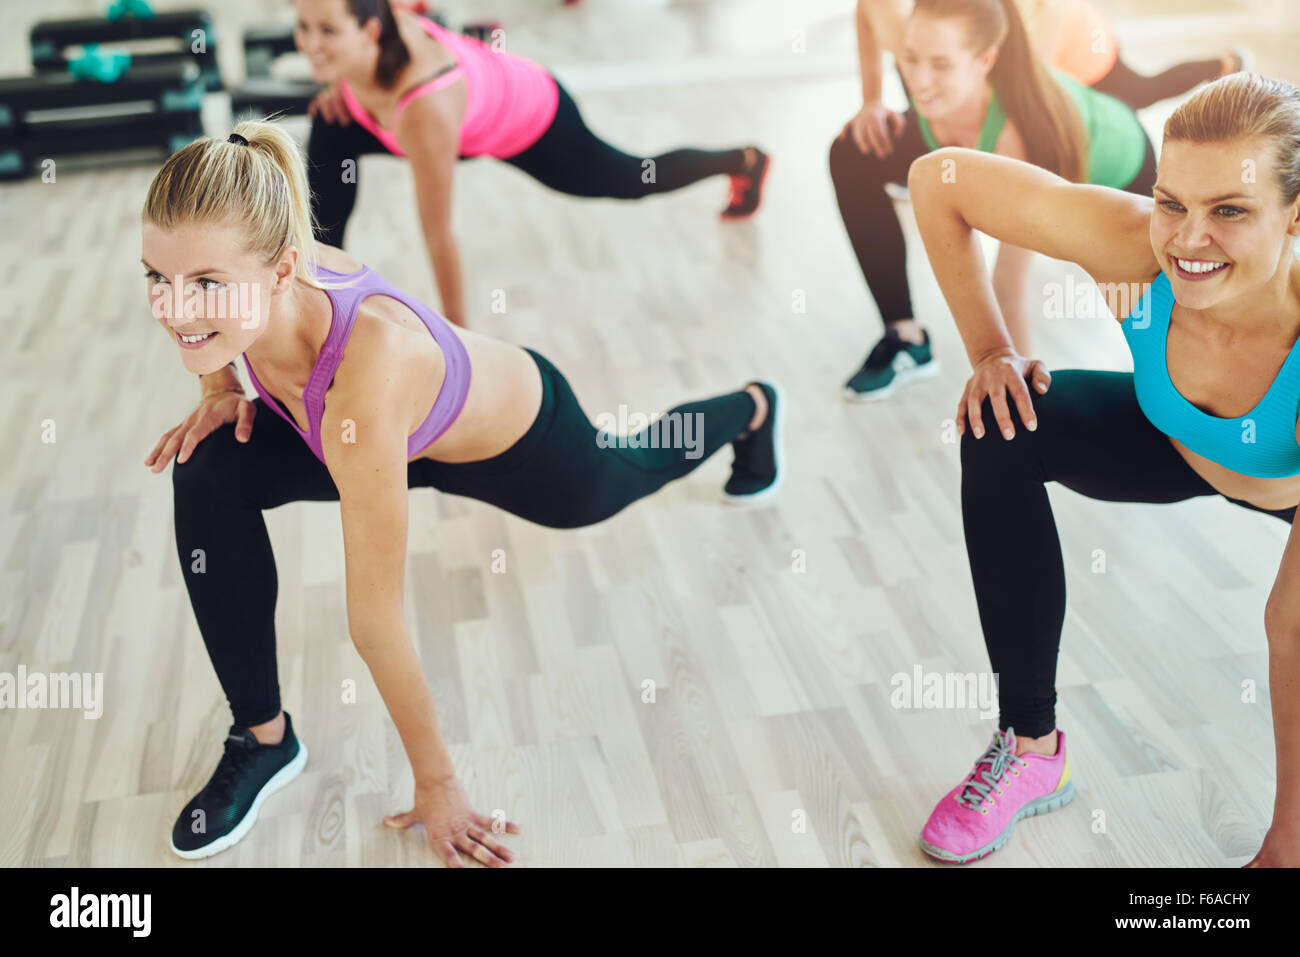 Fitness, Sport, Training, Gym And Lifestyle Concept - Group Of Women  Working Out In Gym Stock Photo, Picture and Royalty Free Image. Image  30613553.